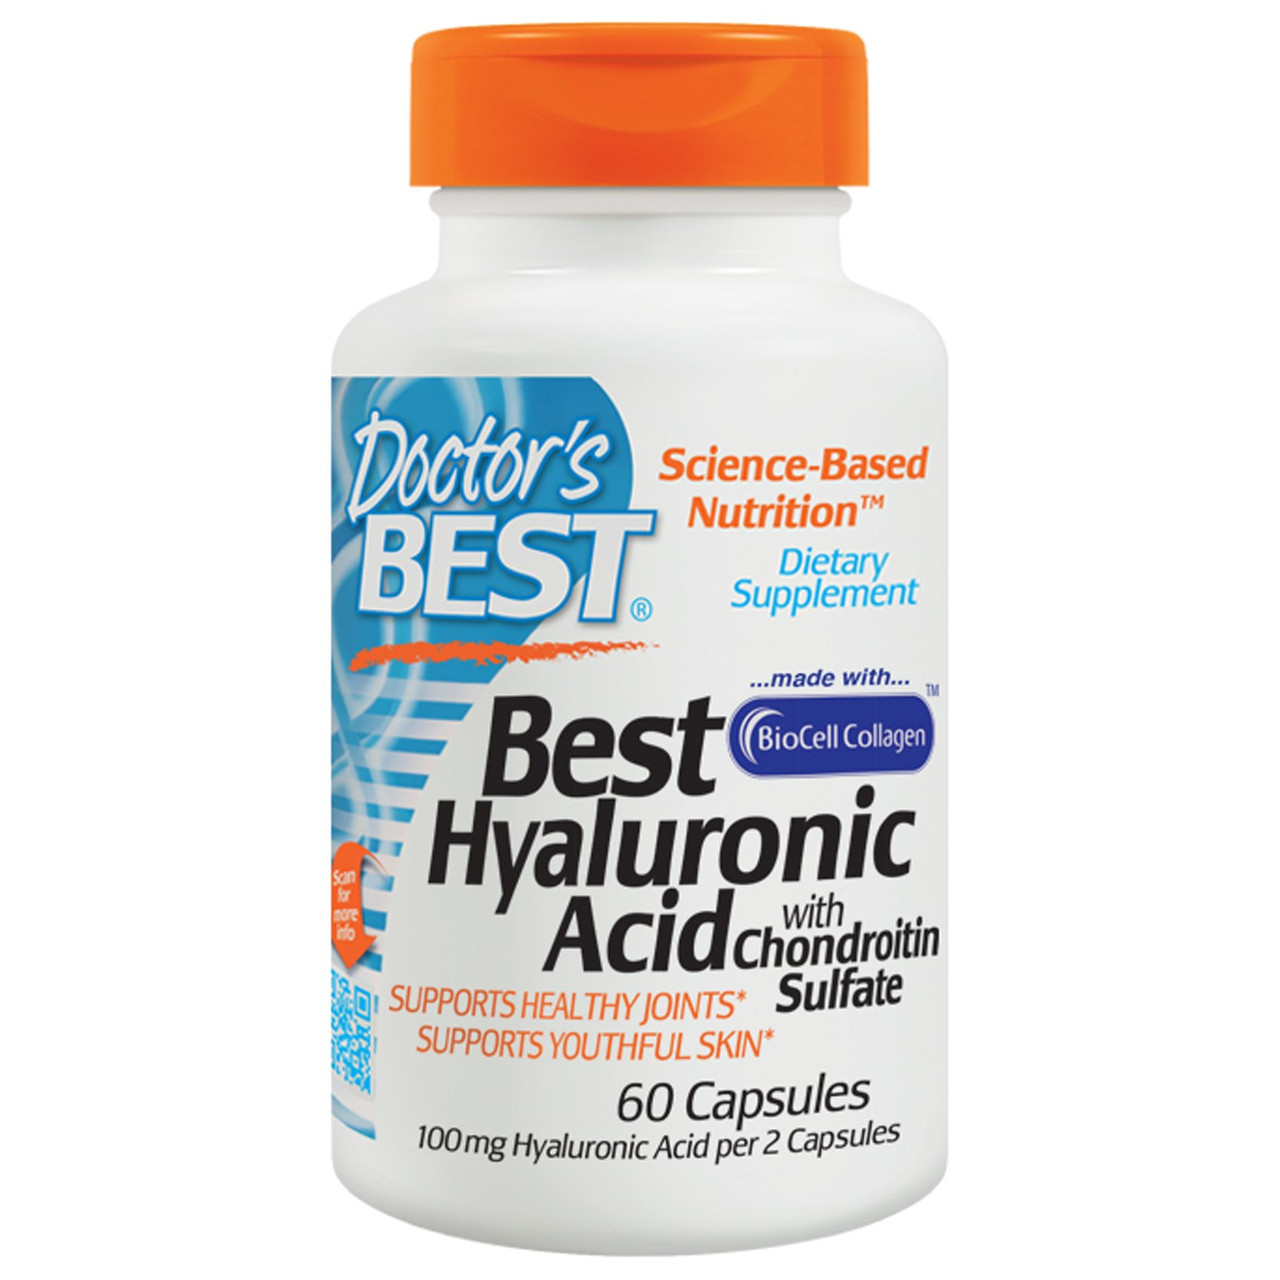 Doctor's s Best Hyaluronic Acid+Chondroitin Sulfate caps 60